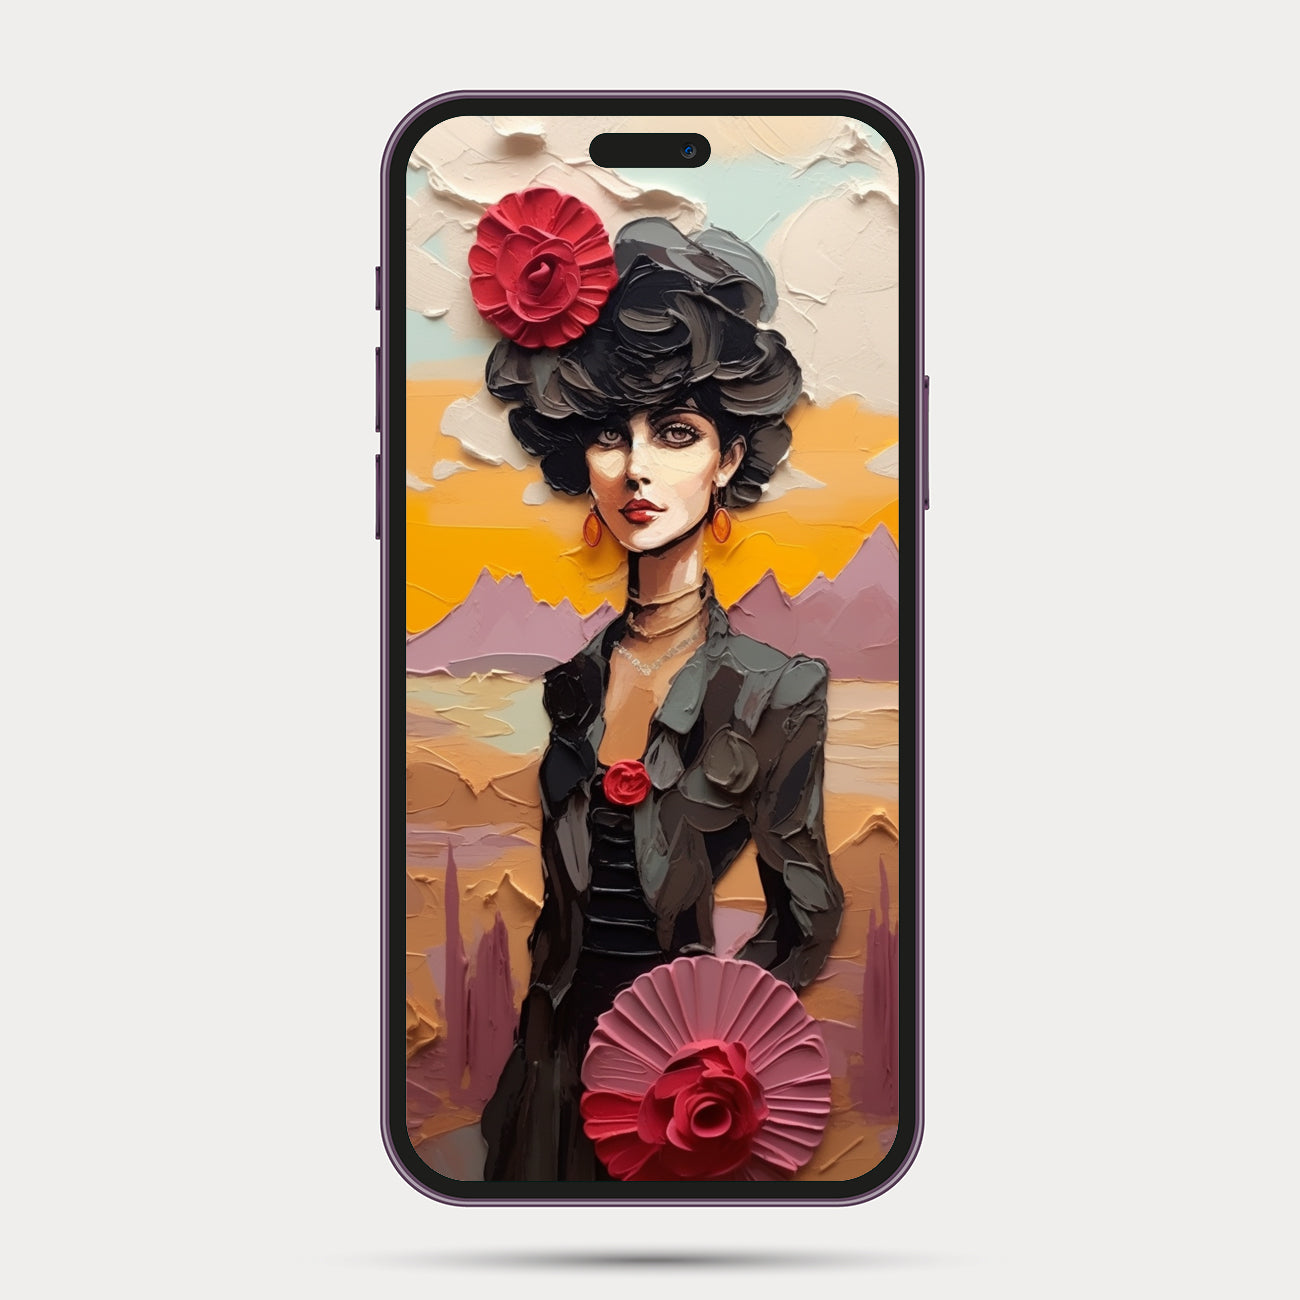 Transform Your Smartphone with Artistic Digital Wallpapers for Fashionable Tech Lovers